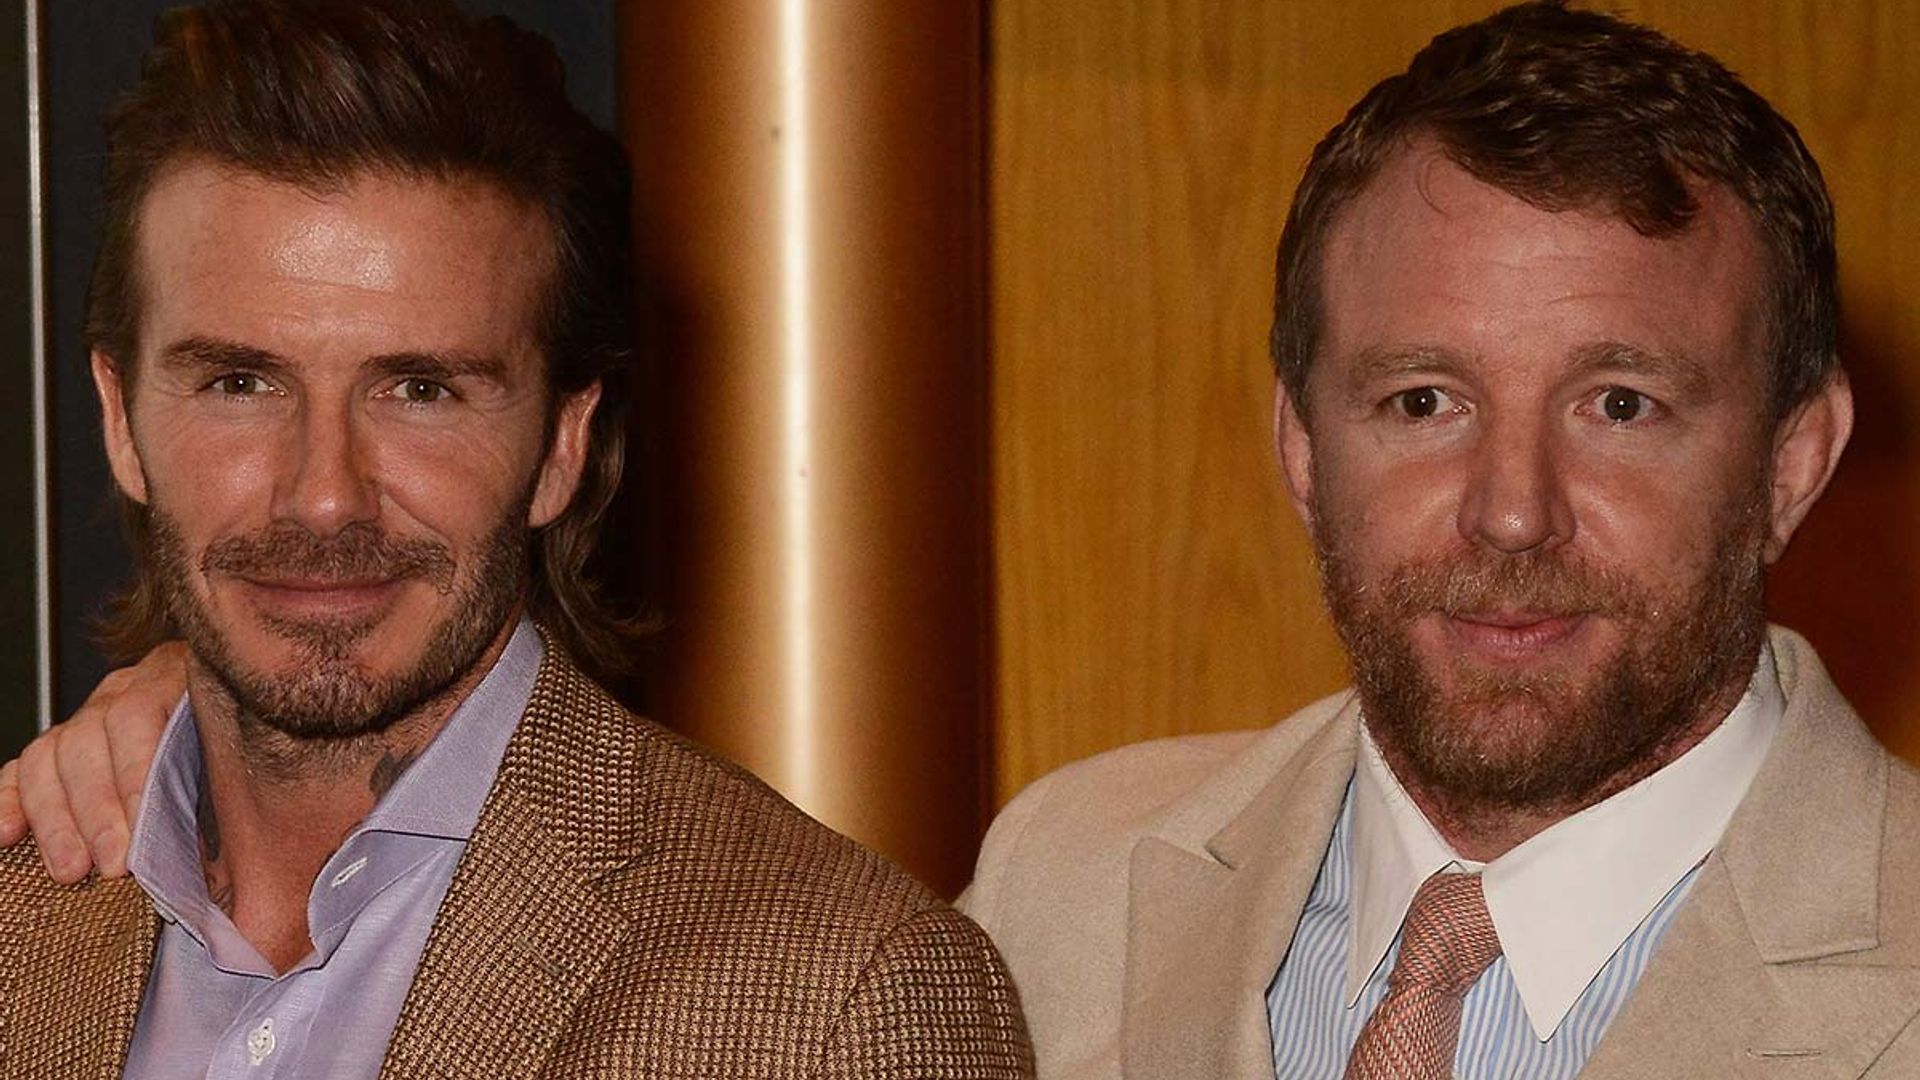 Fire breaks out at David Beckham and Guy Ritchie's pub - details